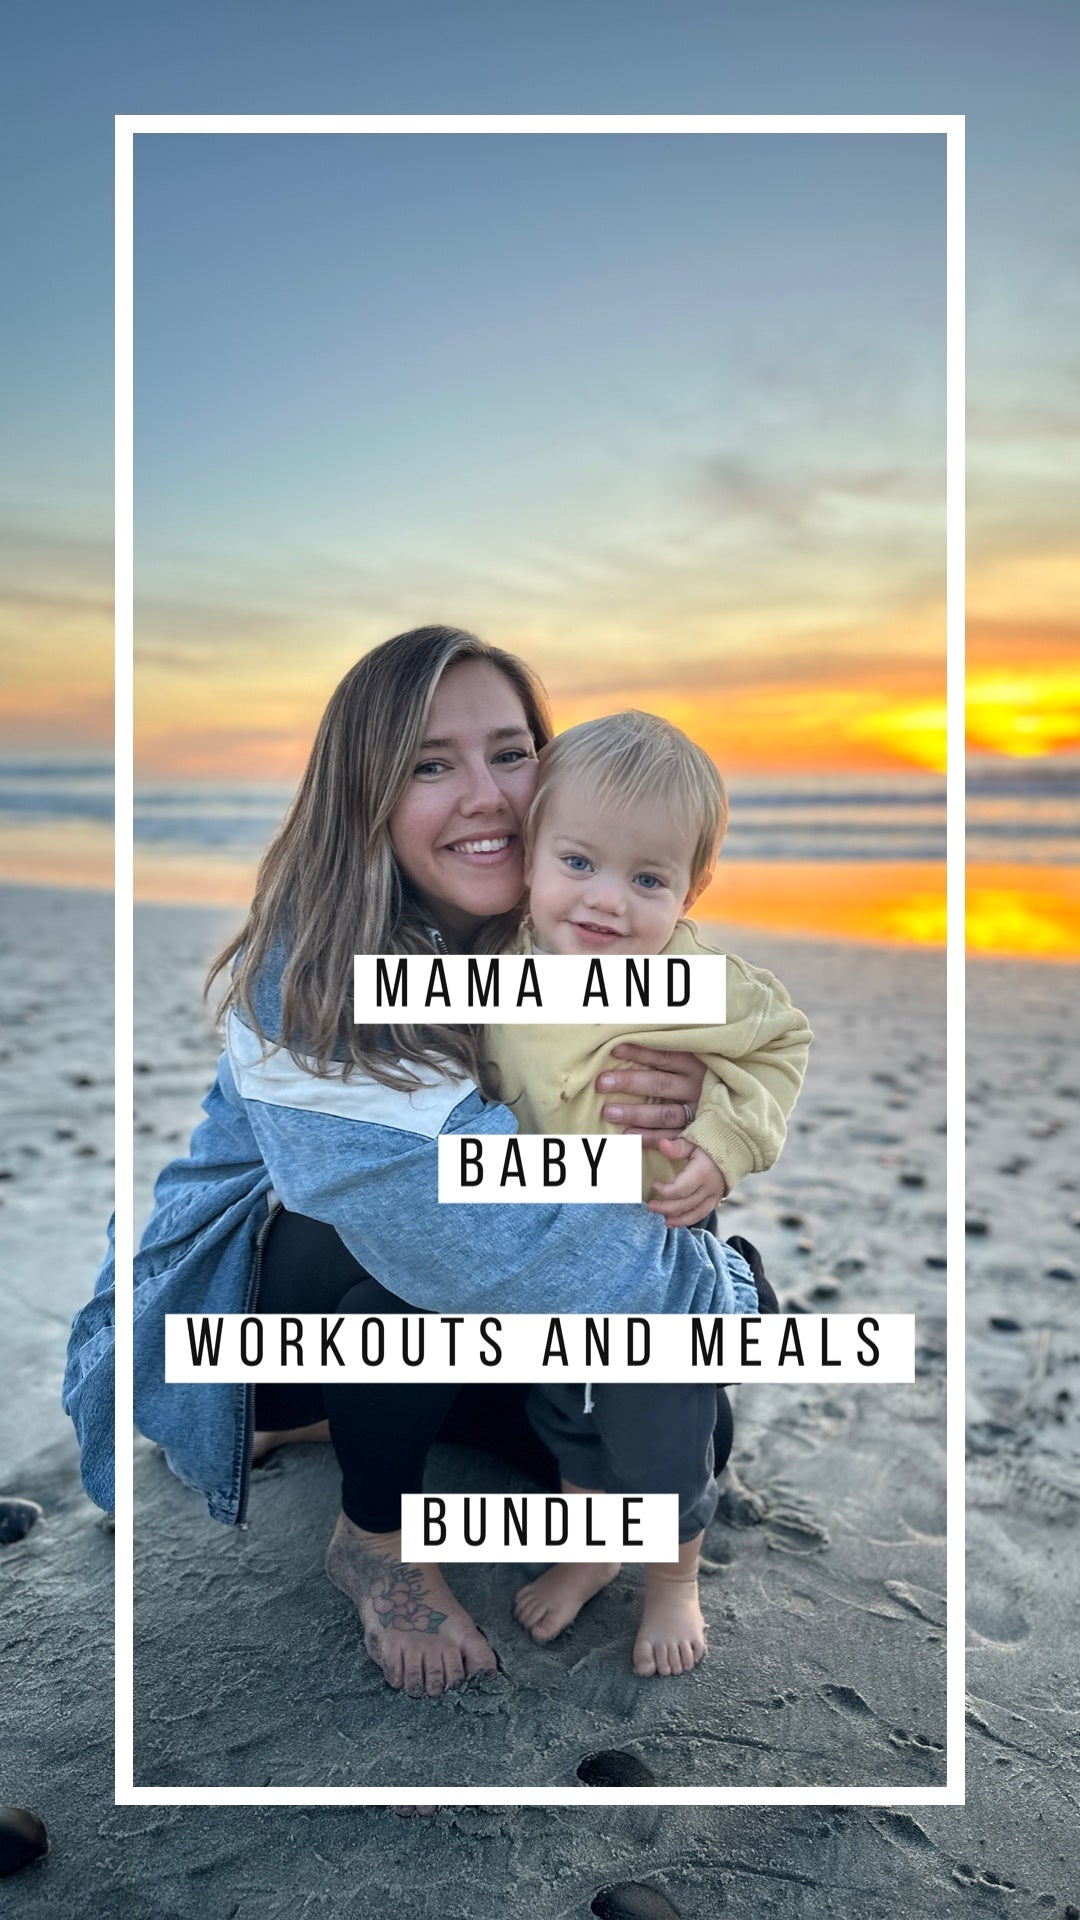 Mama and Baby Bundle (Workouts and Meals)